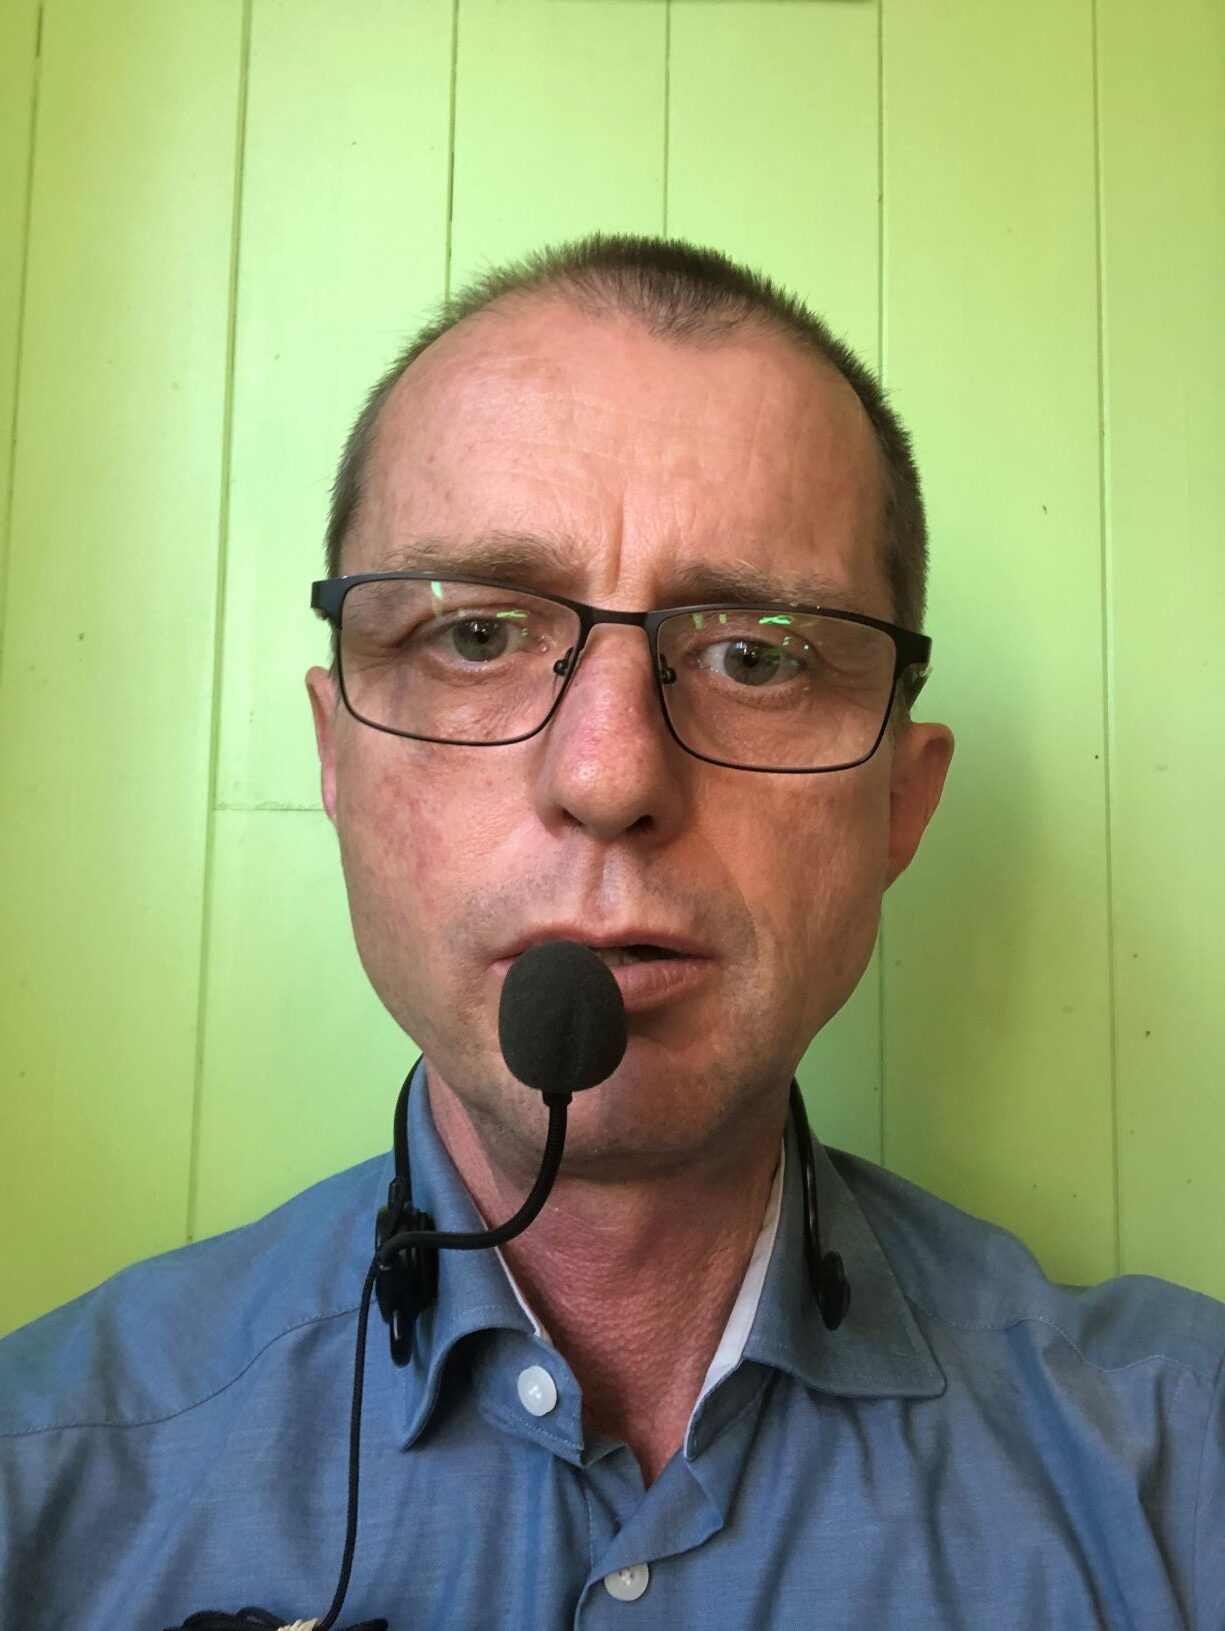 Stephen wearing a voice amplifier mic in front of lips, supported by a flexible stand worn around the neck